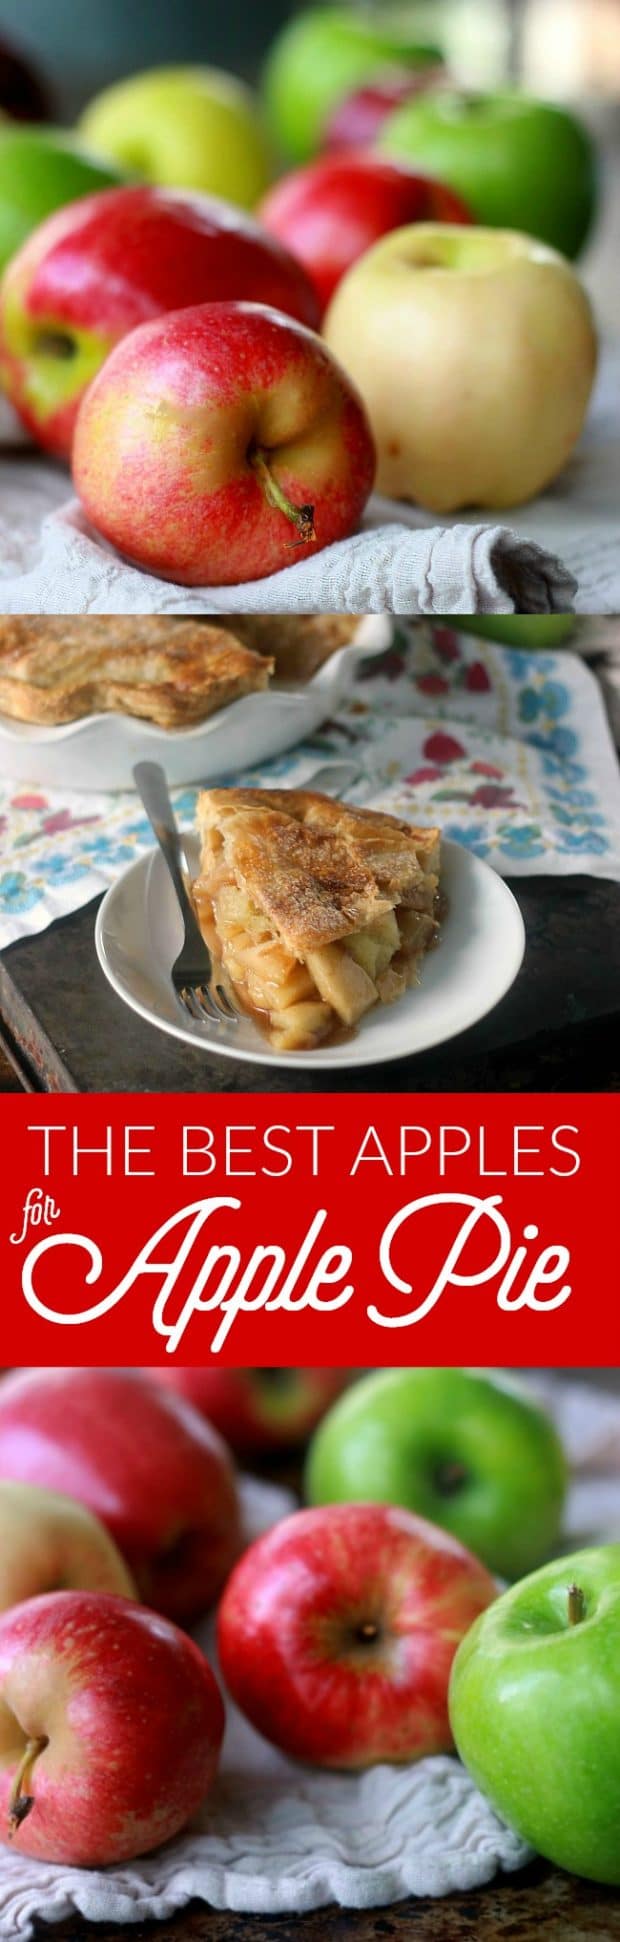 With such a wide variety of choices, choosing the best apples for apple pie can be a daunting task. To make the process easier, I have tested a variety of apples so that I can help you determine which apples to choose for your perfect apple pie! 